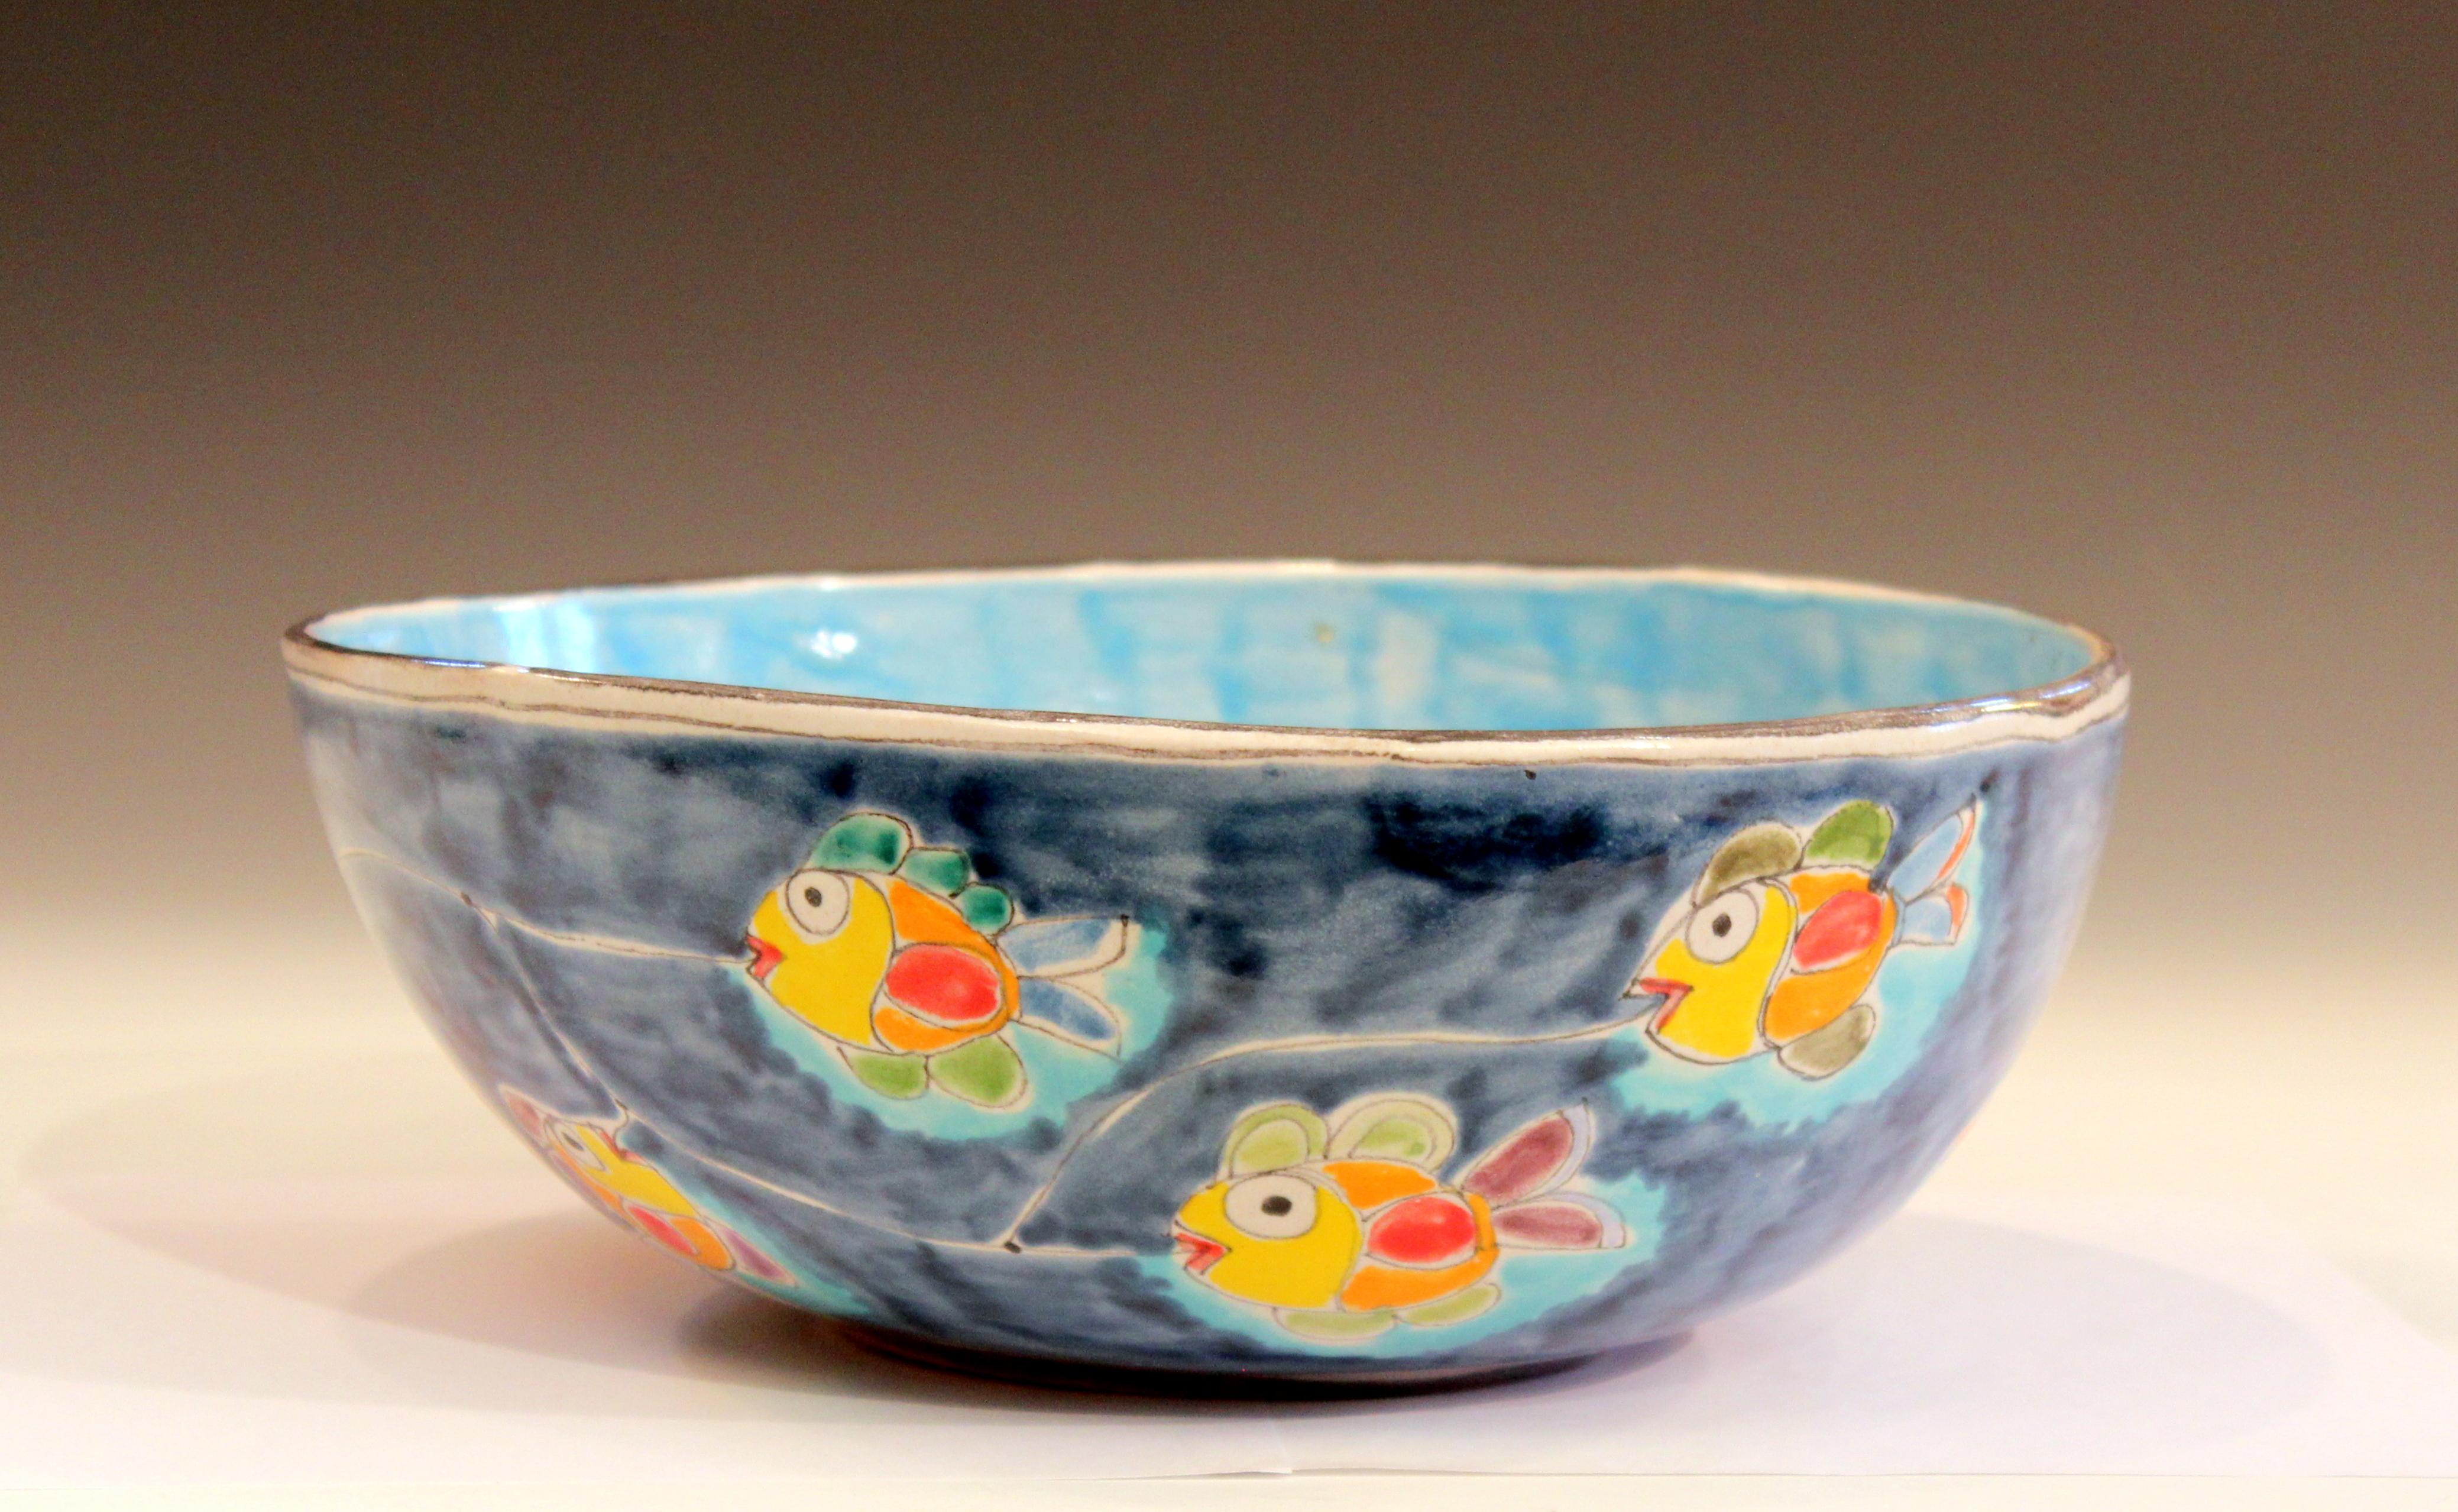 Large vintage handmade DeSimone bowl with festive scene of fisherman in a boat with fish on the line and a squad of squids trailing behind, circa 1960s. Measures: 12